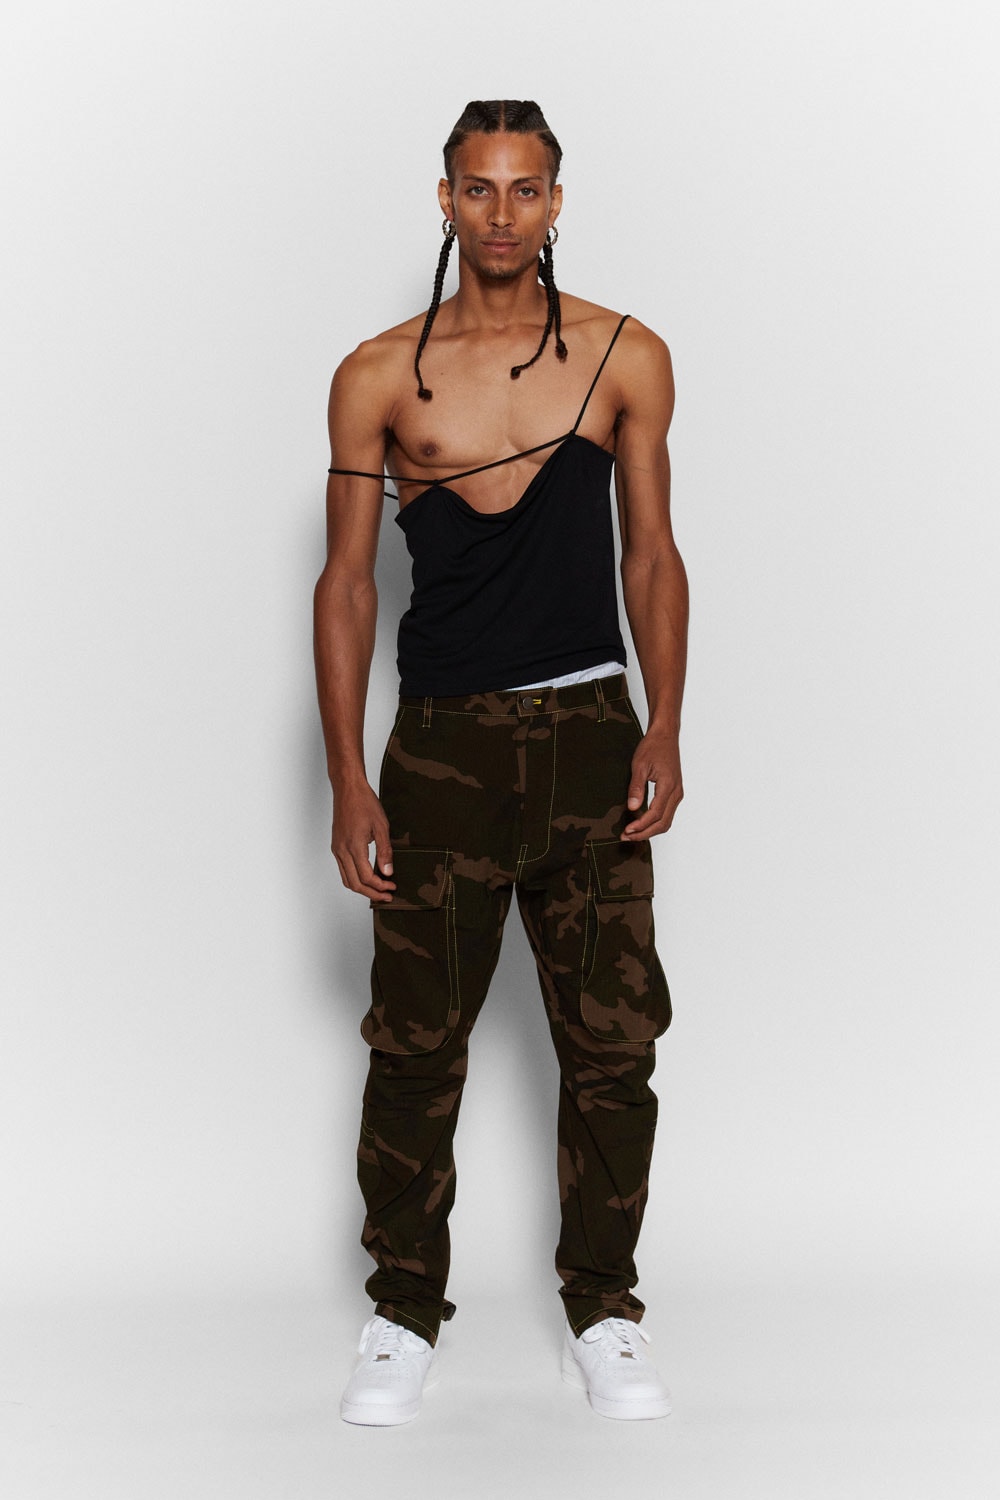 k.ngsley kingsley gbadegesin black owned brand brooklyn based bushwick fashion label corpcore corporate clubbing collection spring summer 2024 black queer trans community